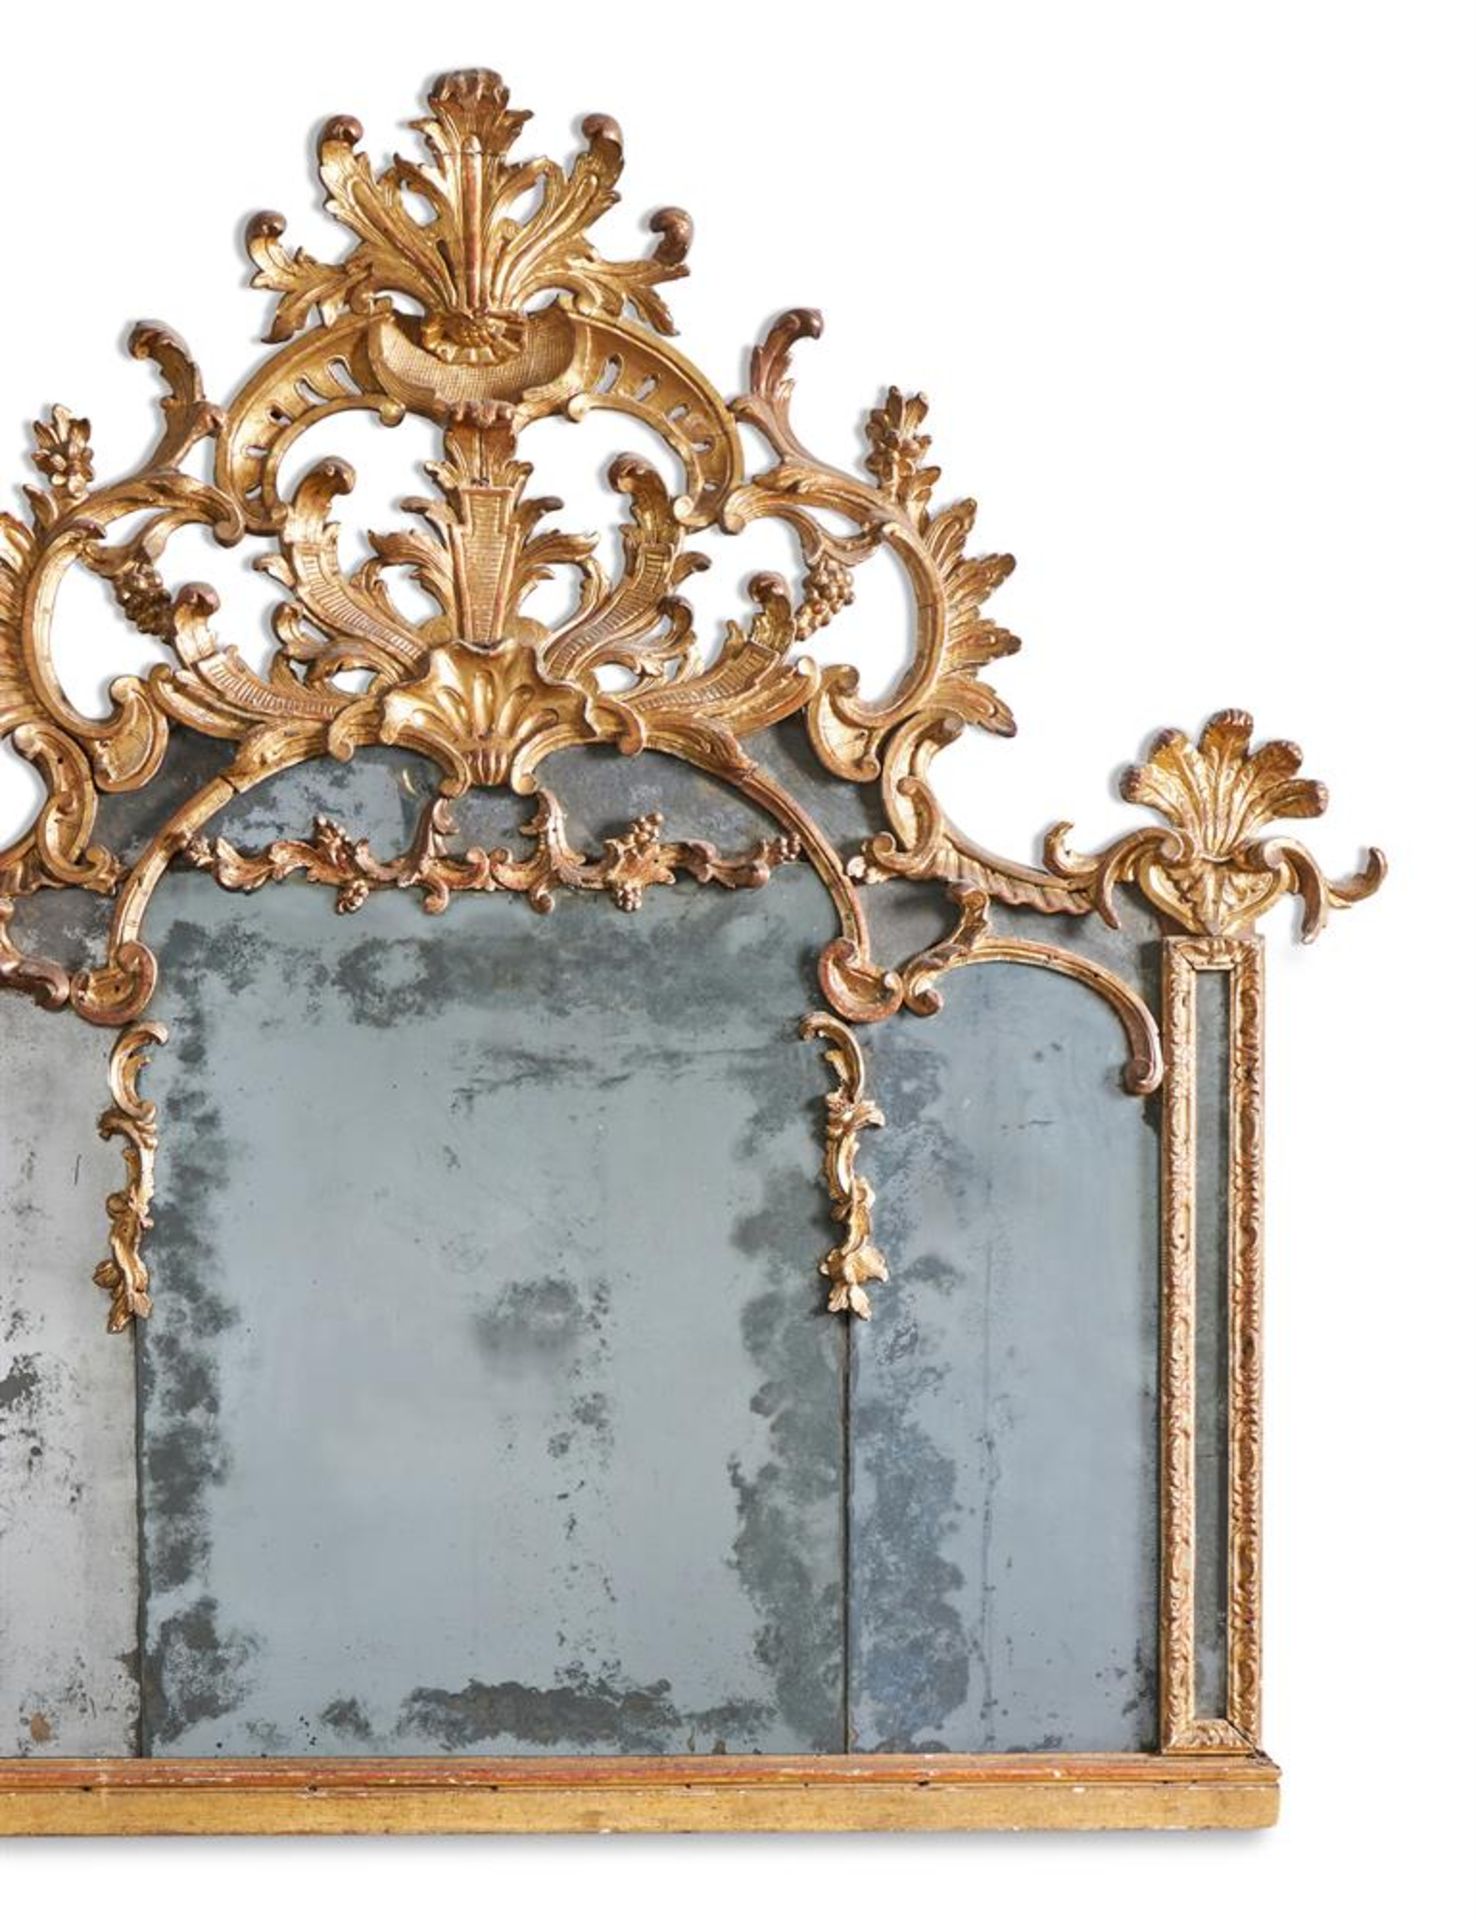 A CARVED GILTWOOD OVERMANTEL MIRROR, NORTH ITALIAN, SECOND QUARTER 18TH CENTURY - Image 2 of 4